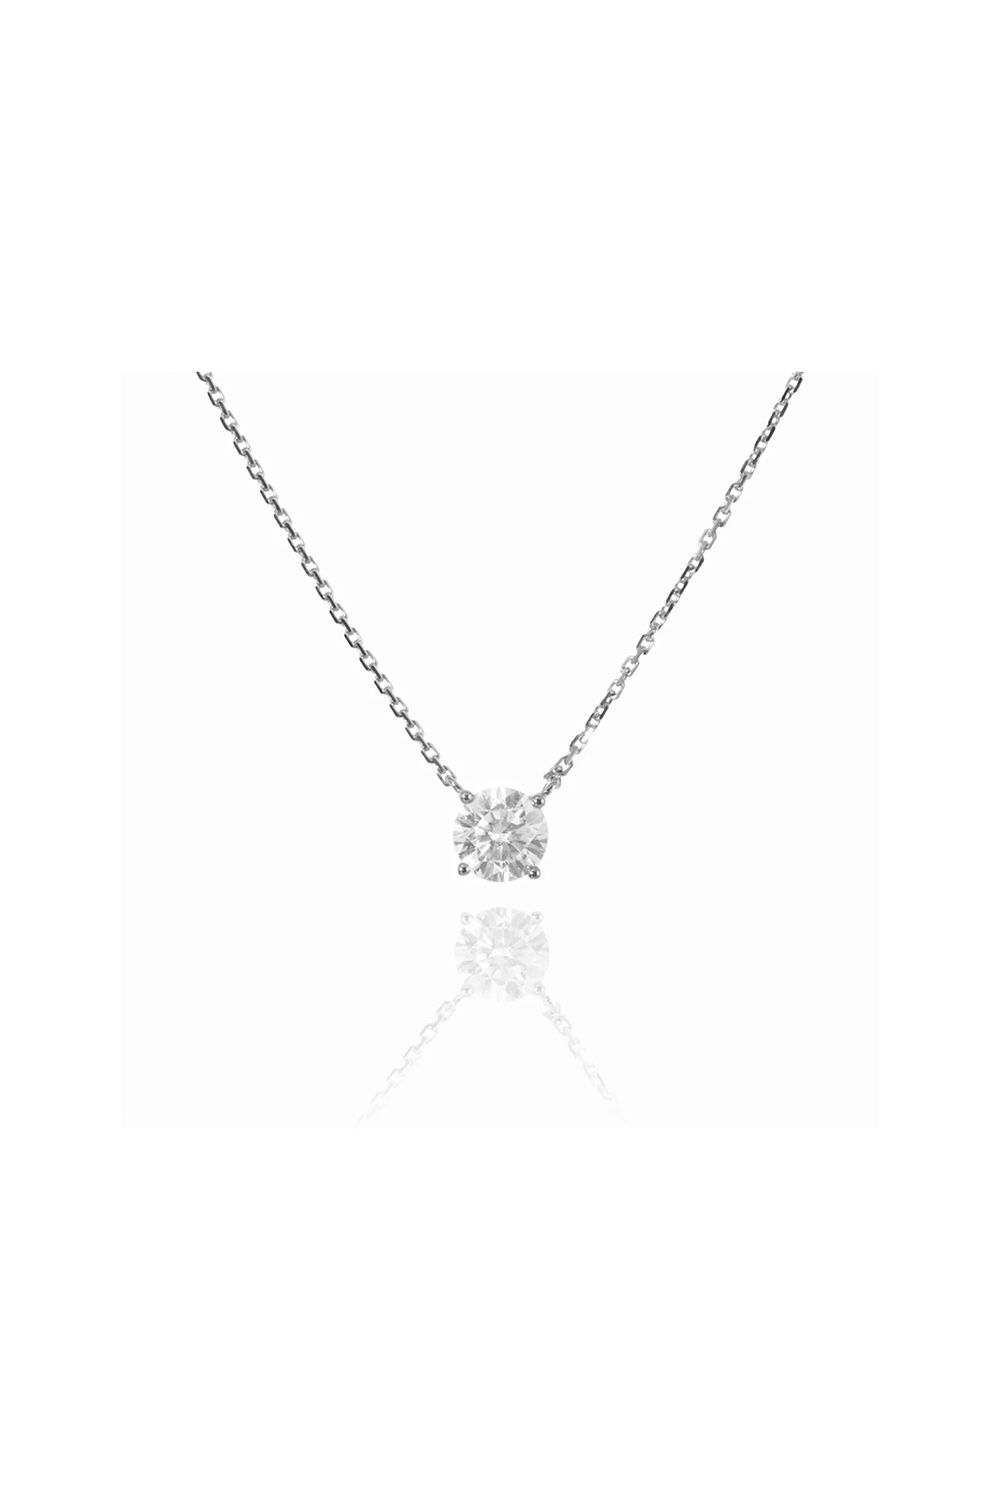 GYPPHY - SOLITAIRE MOISSANITE NECKLACE / ソリティア モアサナイト